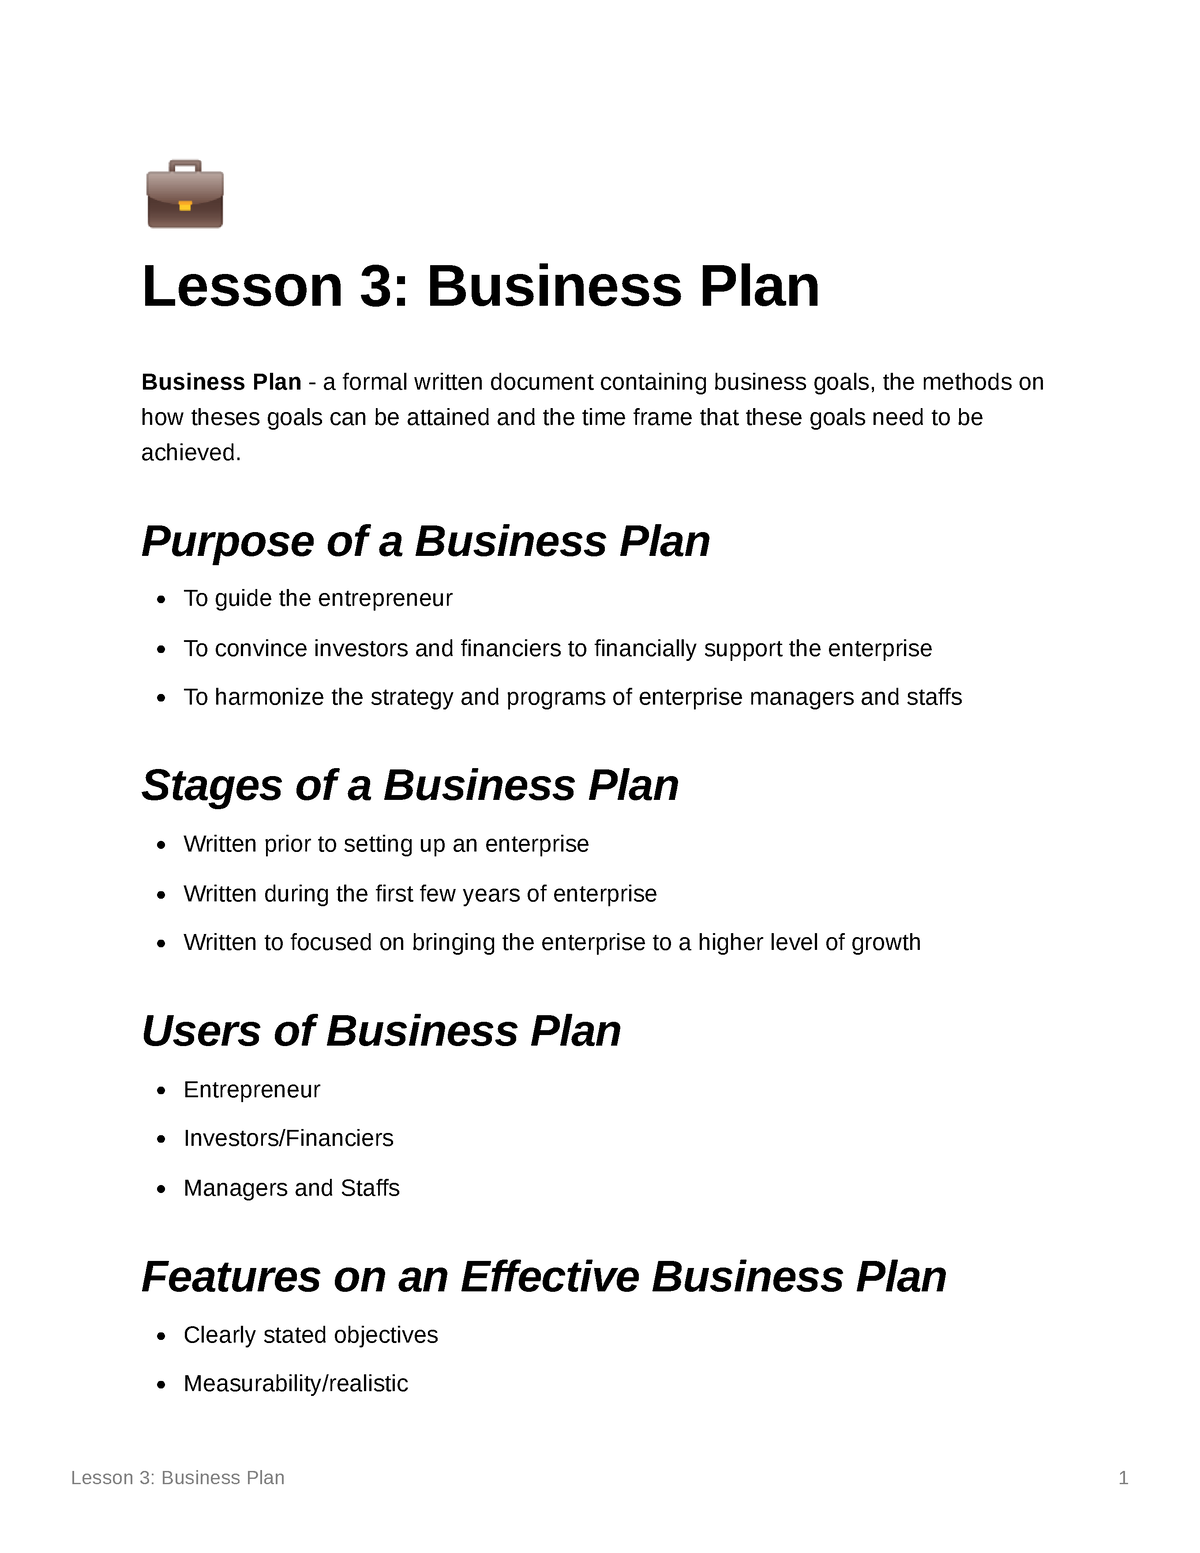 business plan is essentially a selling document